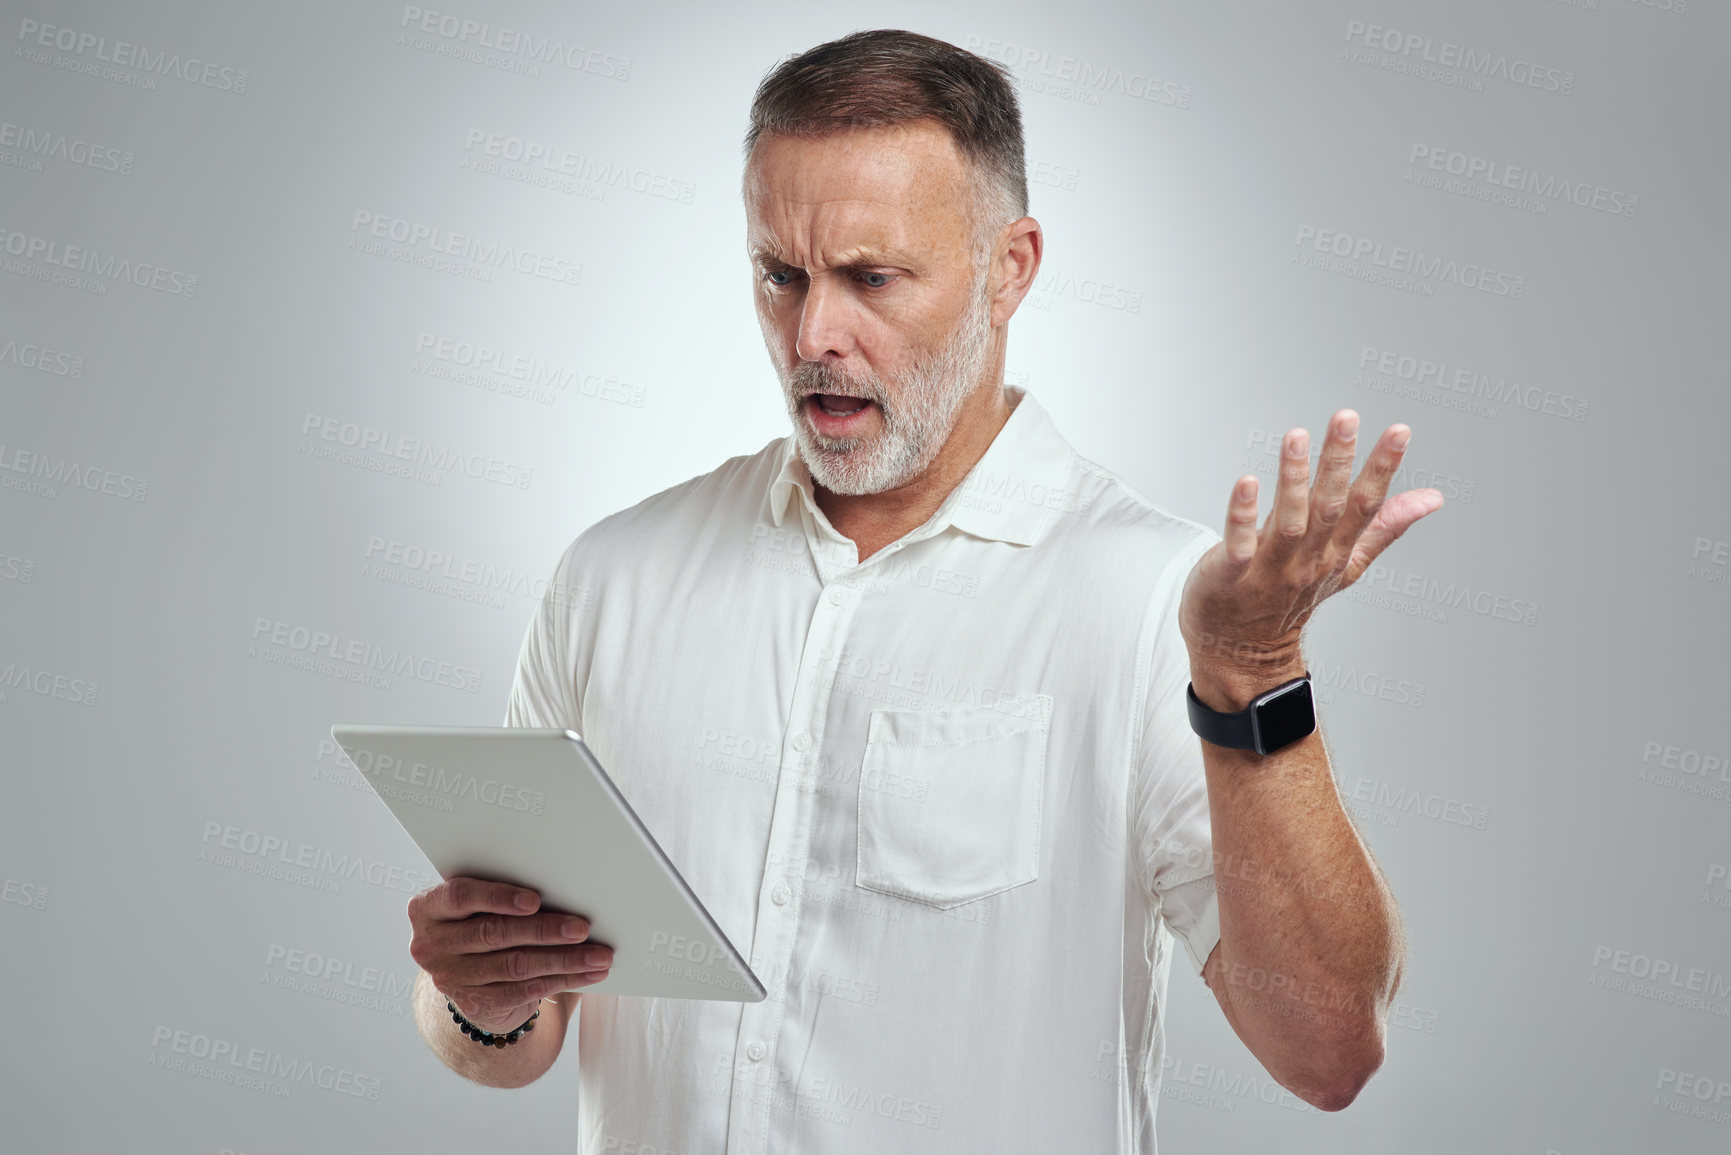 Buy stock photo Studio shot of a mature man looking confused while using a digital tablet against a grey background